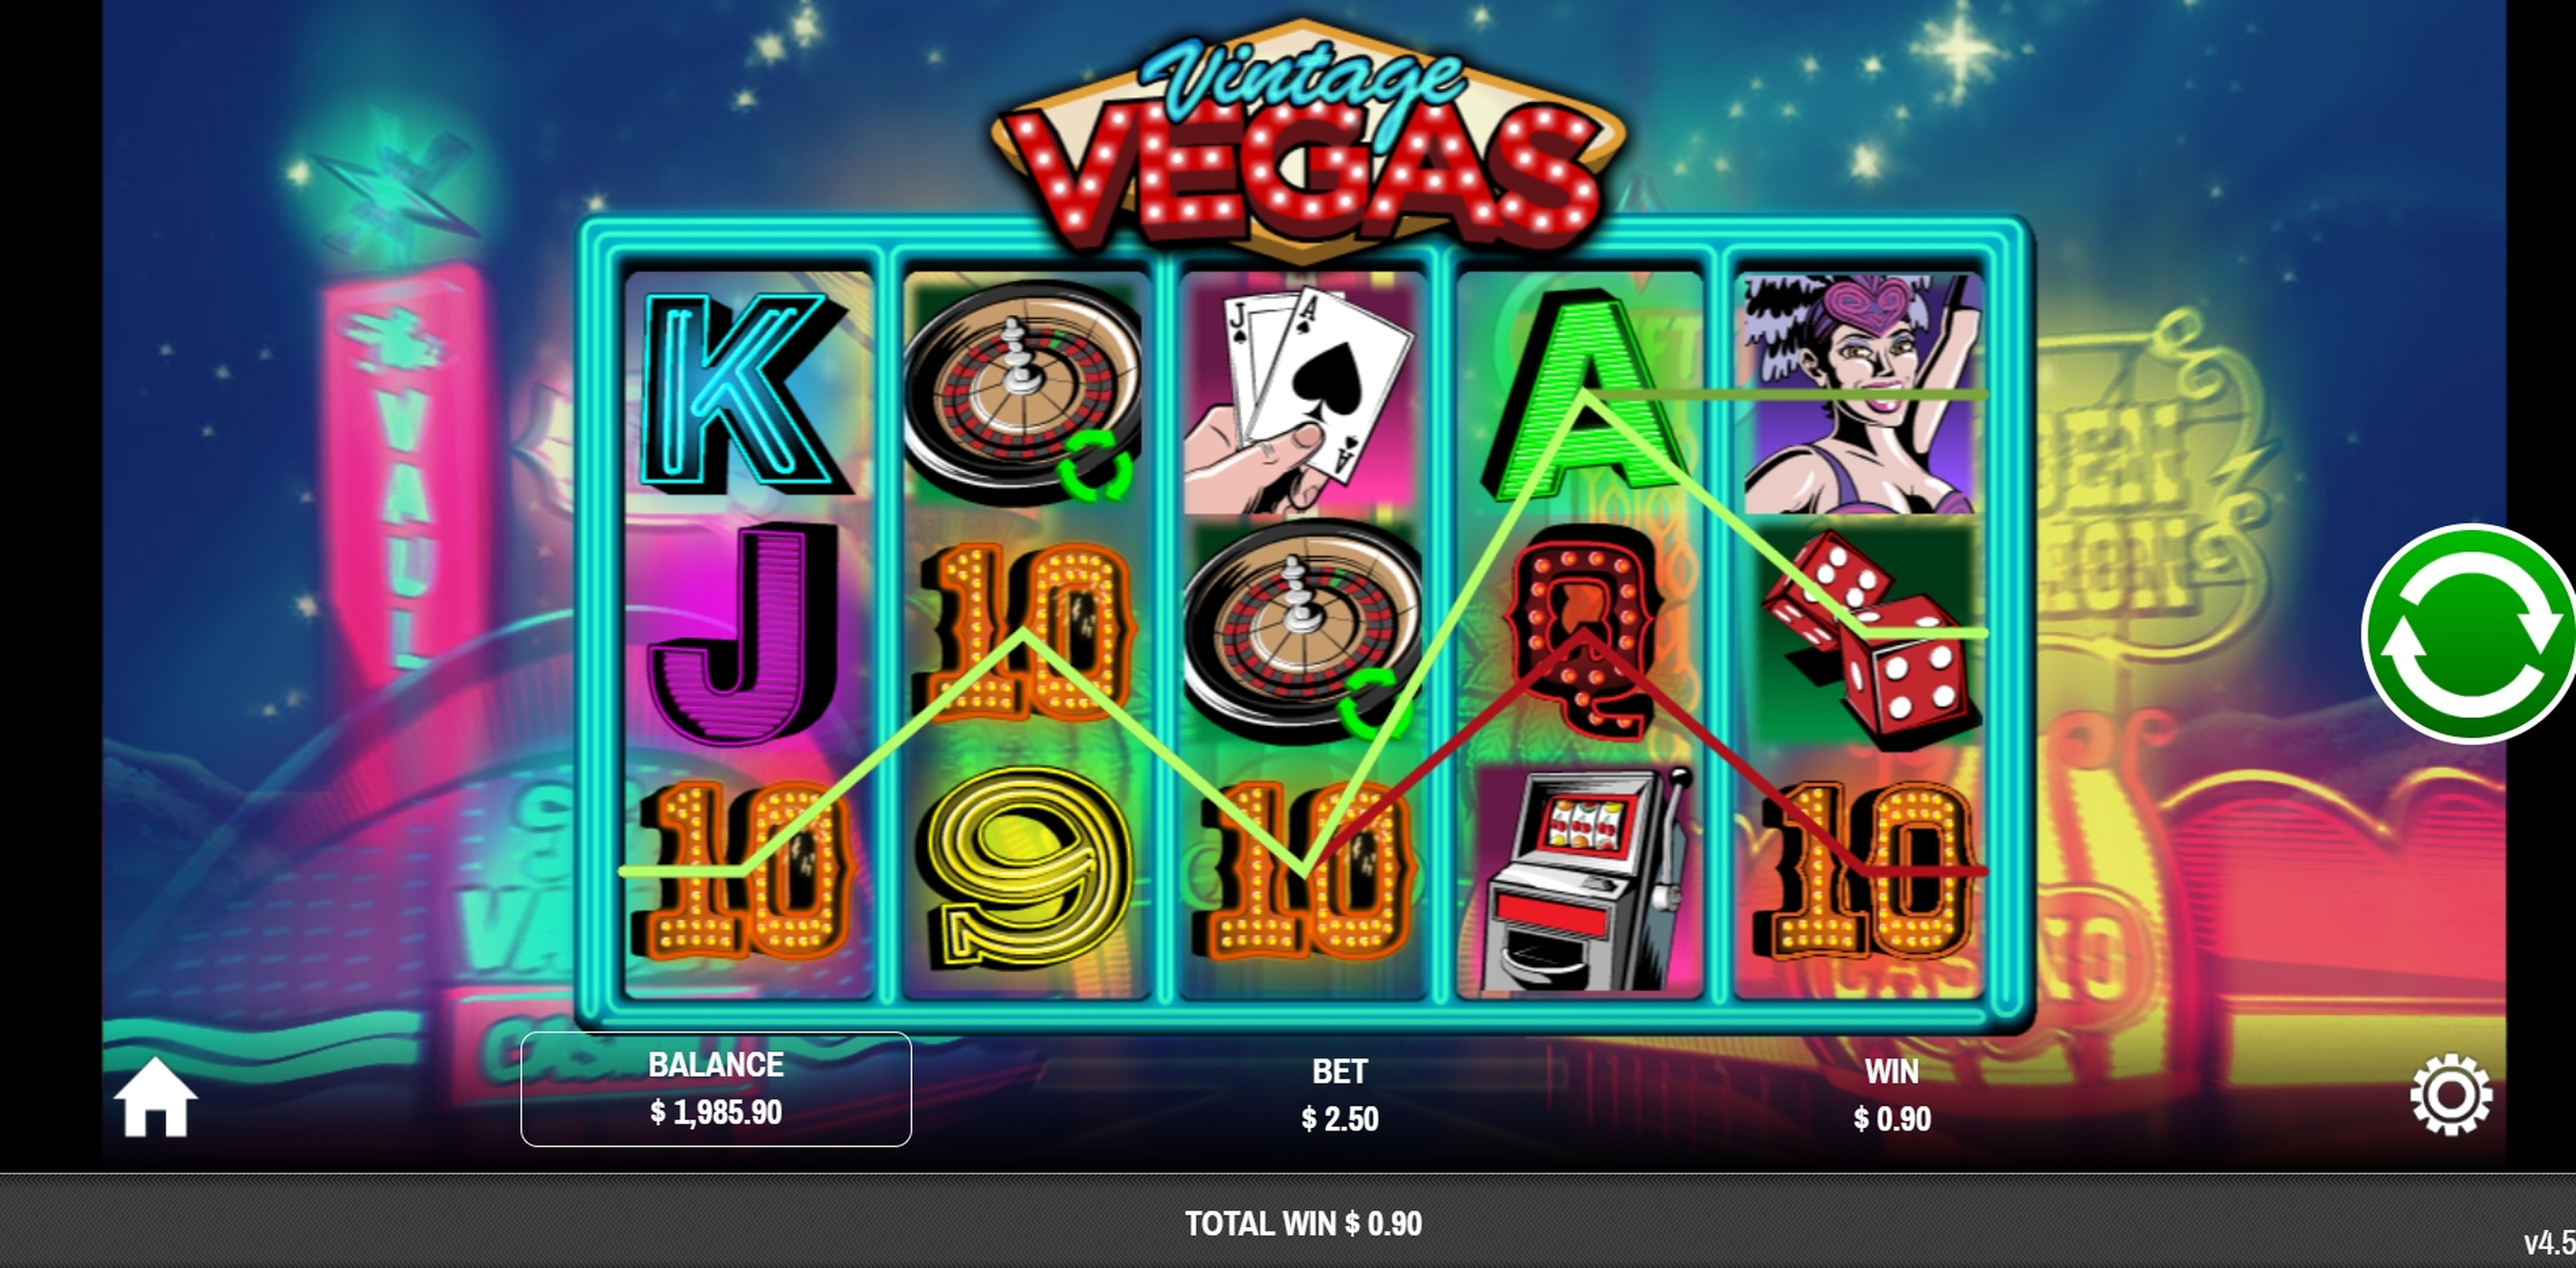 Win Money in Vintage Vegas Free Slot Game by Rival